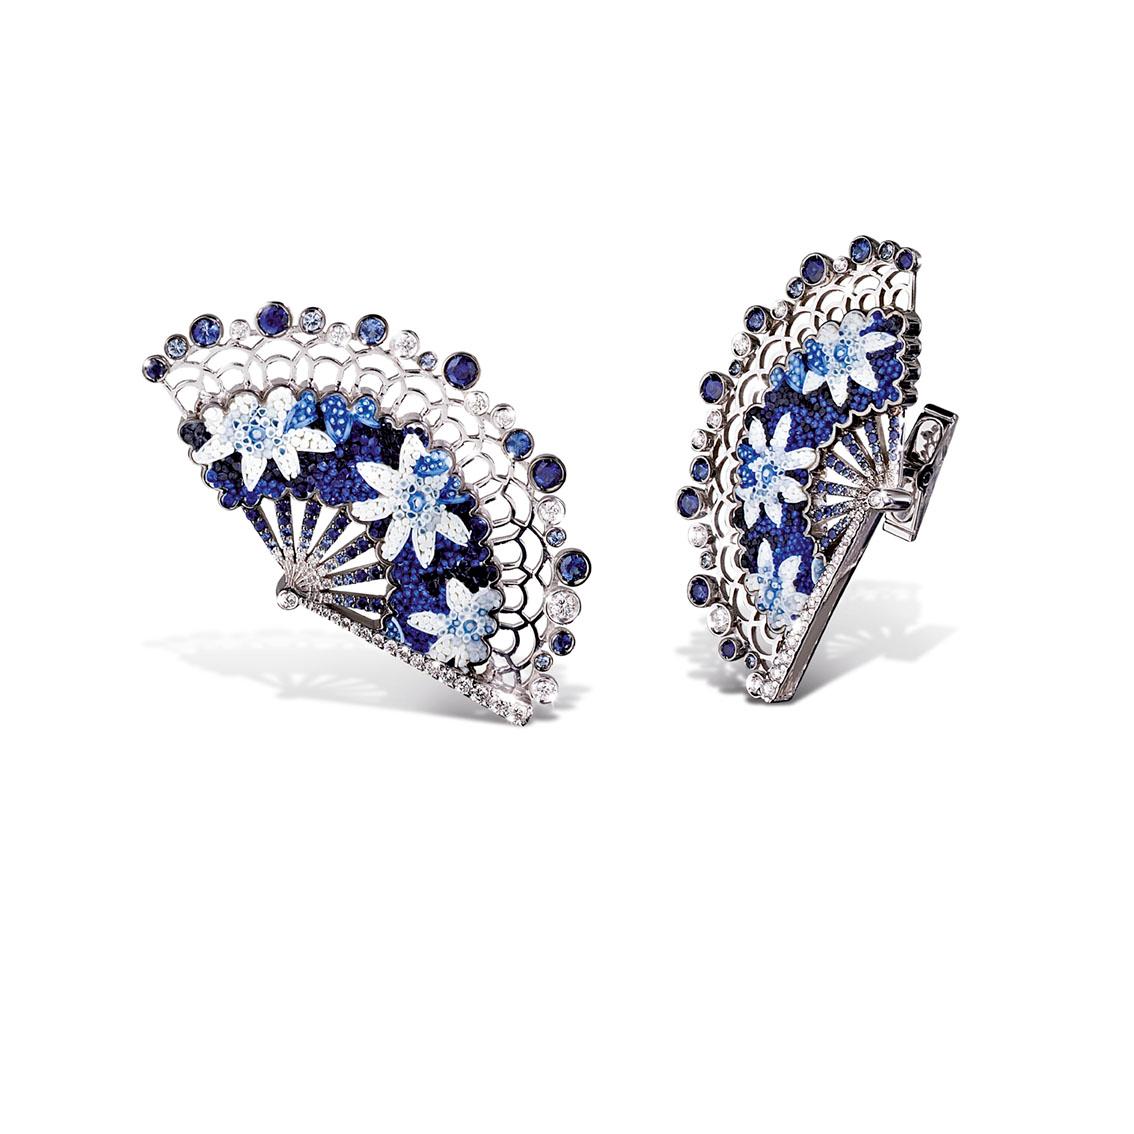 Modern Cufflinks White Gold White Diamonds Sapphires Hand Decorated with Micro Mosaic For Sale